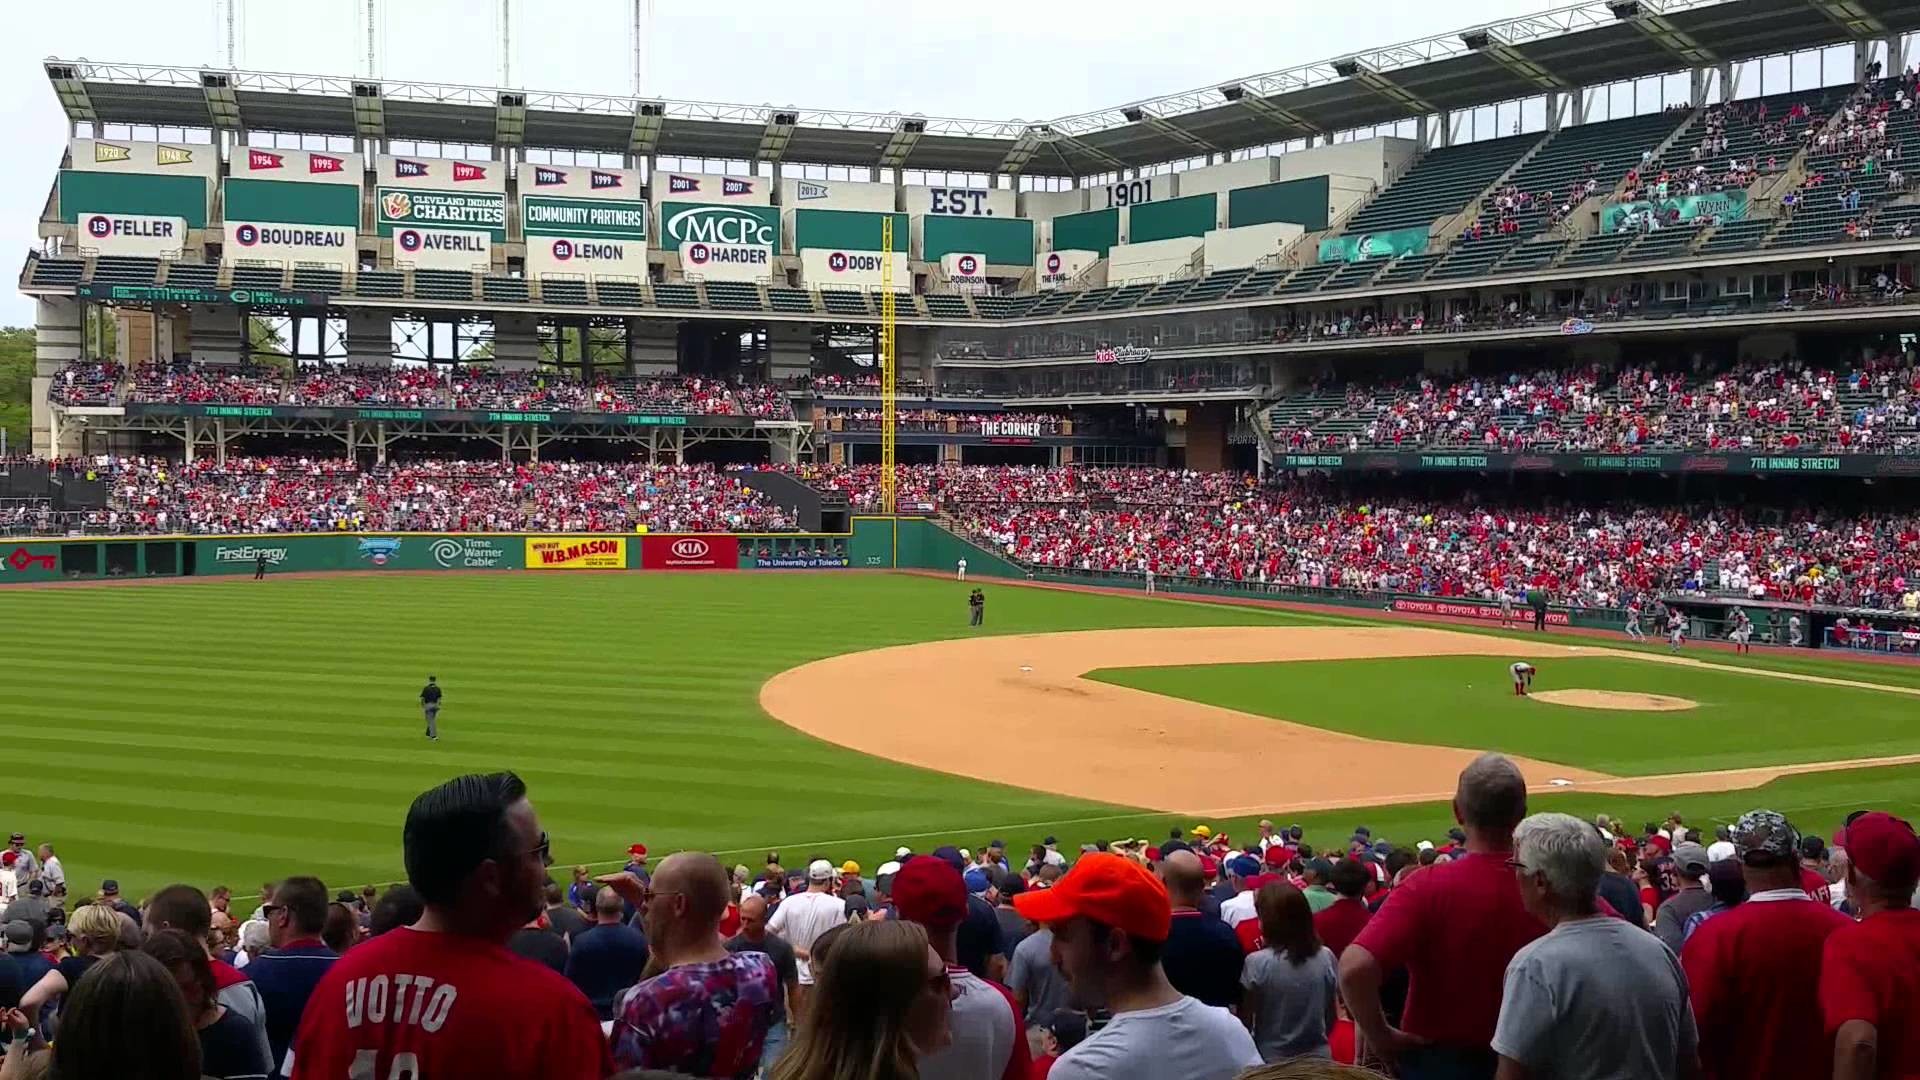 1920x1080 Take me out to the ballgame - Cleveland Indians 2015